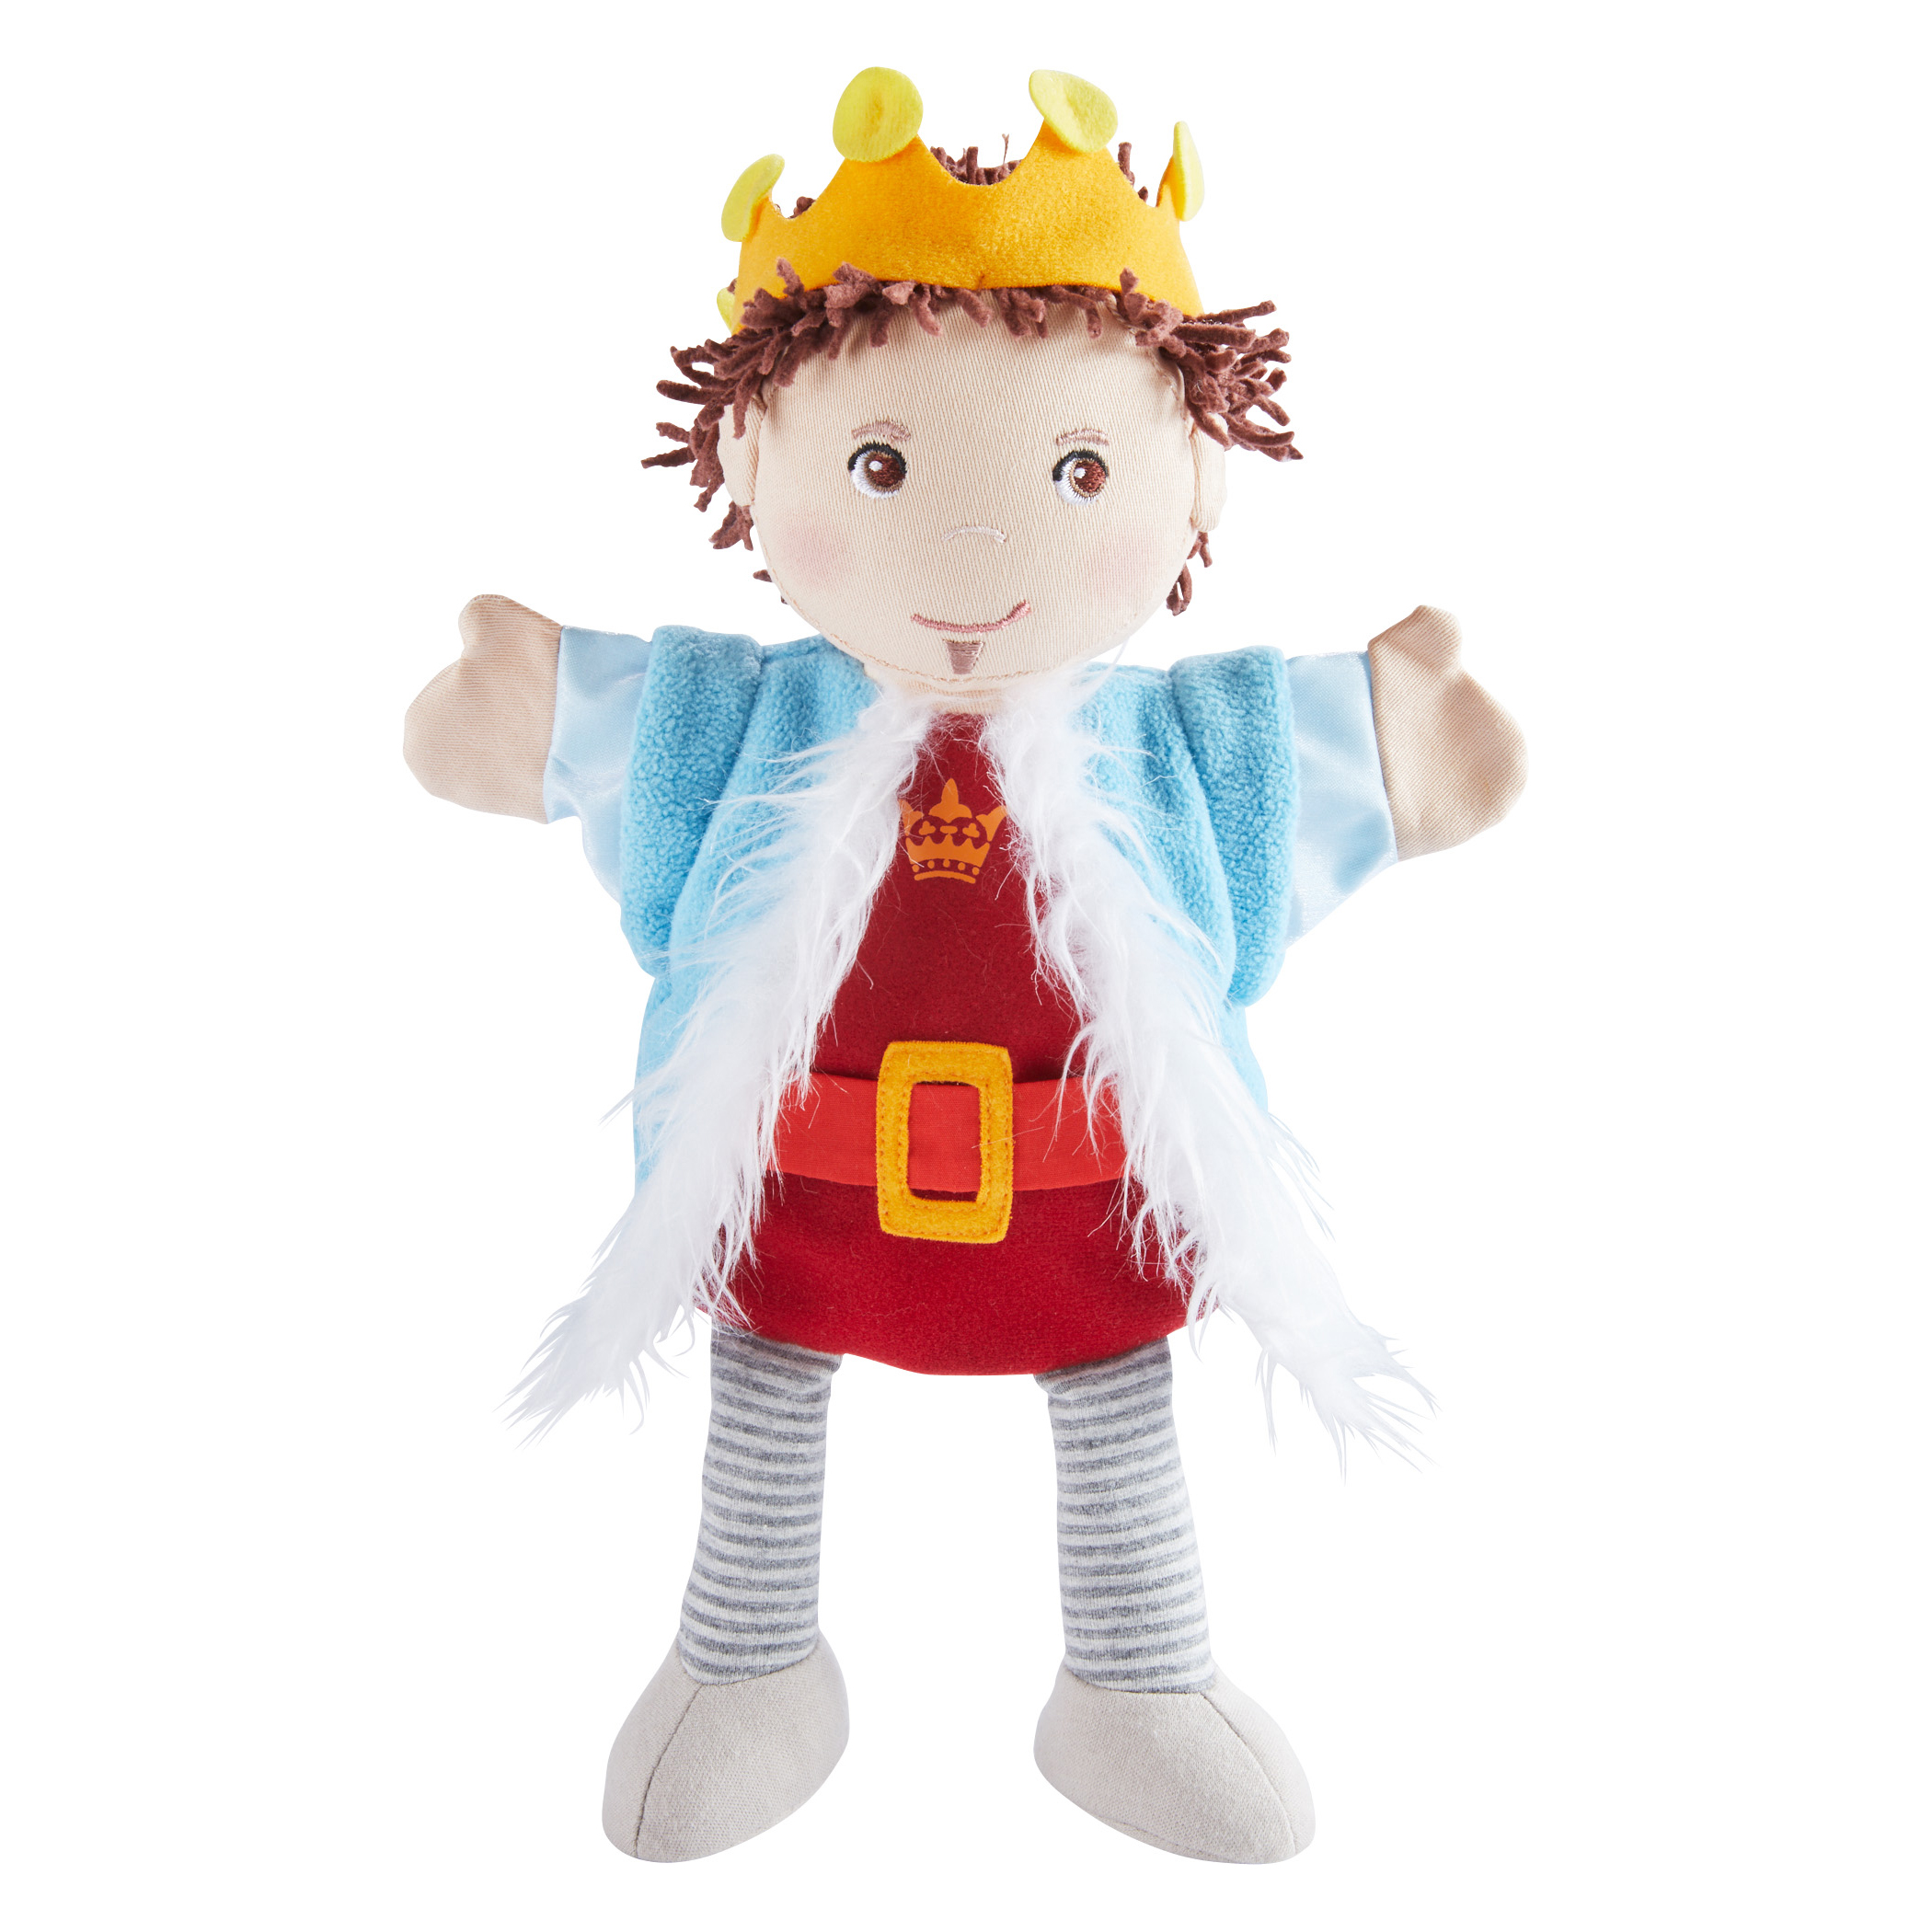 Prince Emir - hand puppet for babies by HABA